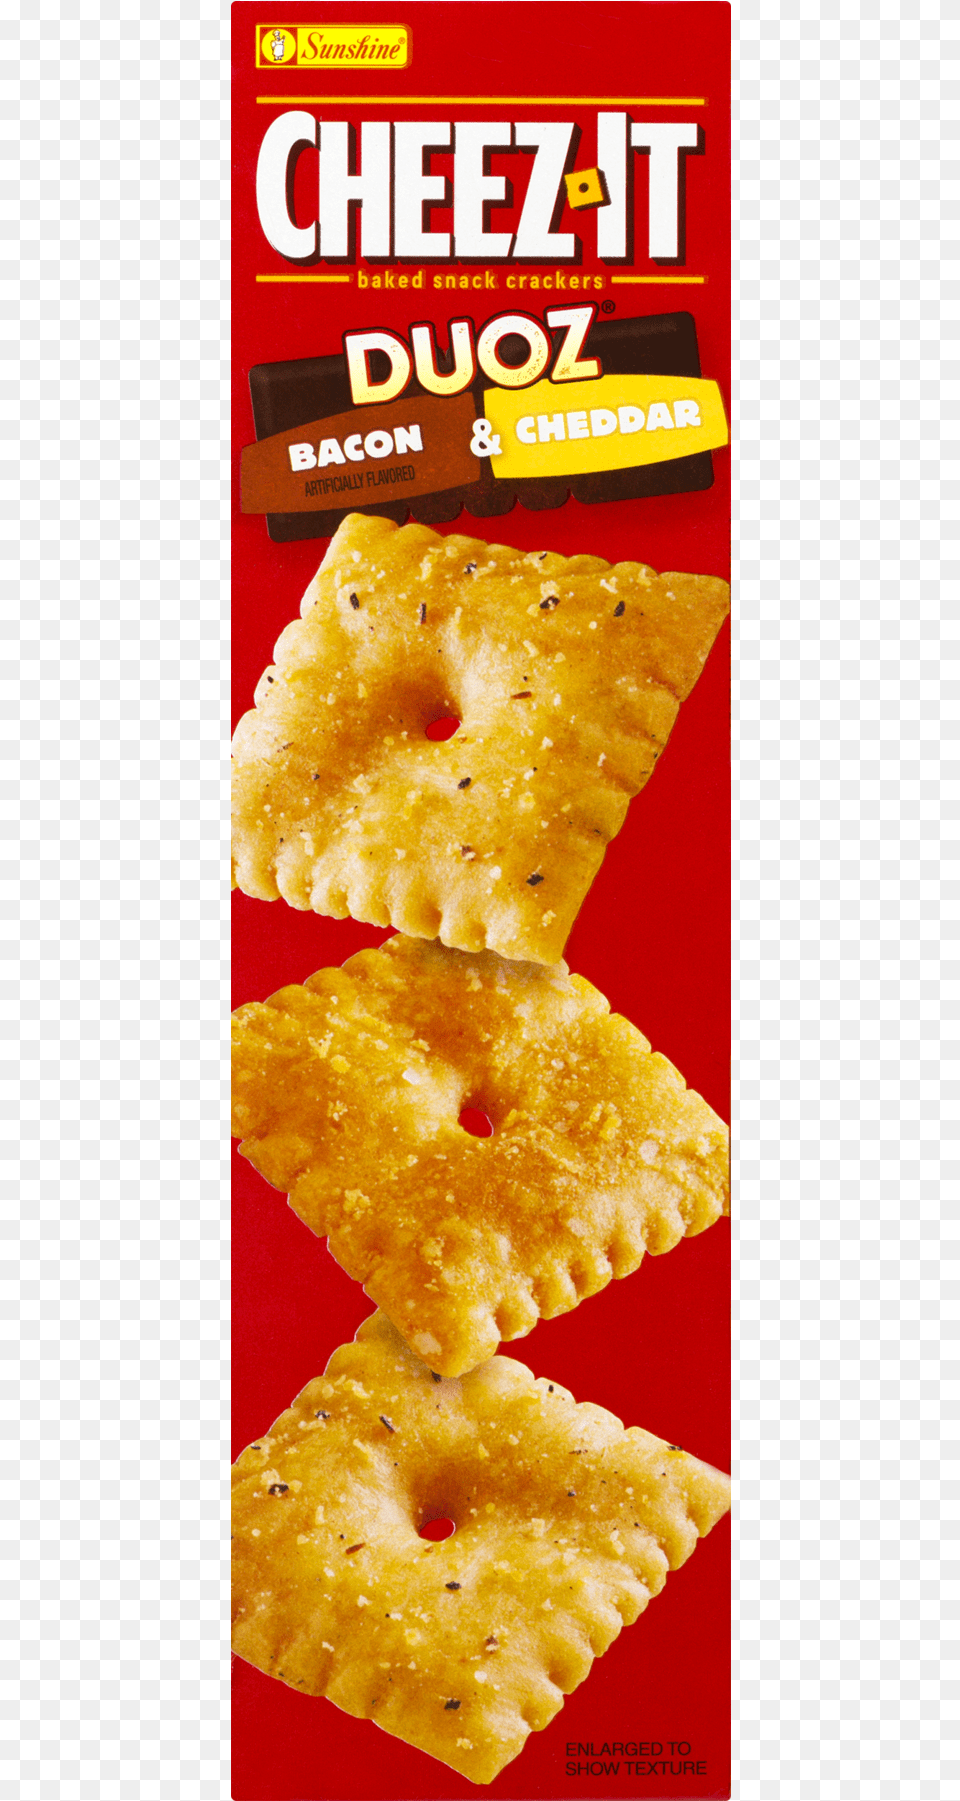 Box Cheez It Duoz Bacon Amp Cheddar Baked Snack Crackers Cheez It Duoz Baked Snack Crackers Bacon, Bread, Cracker, Food Free Png